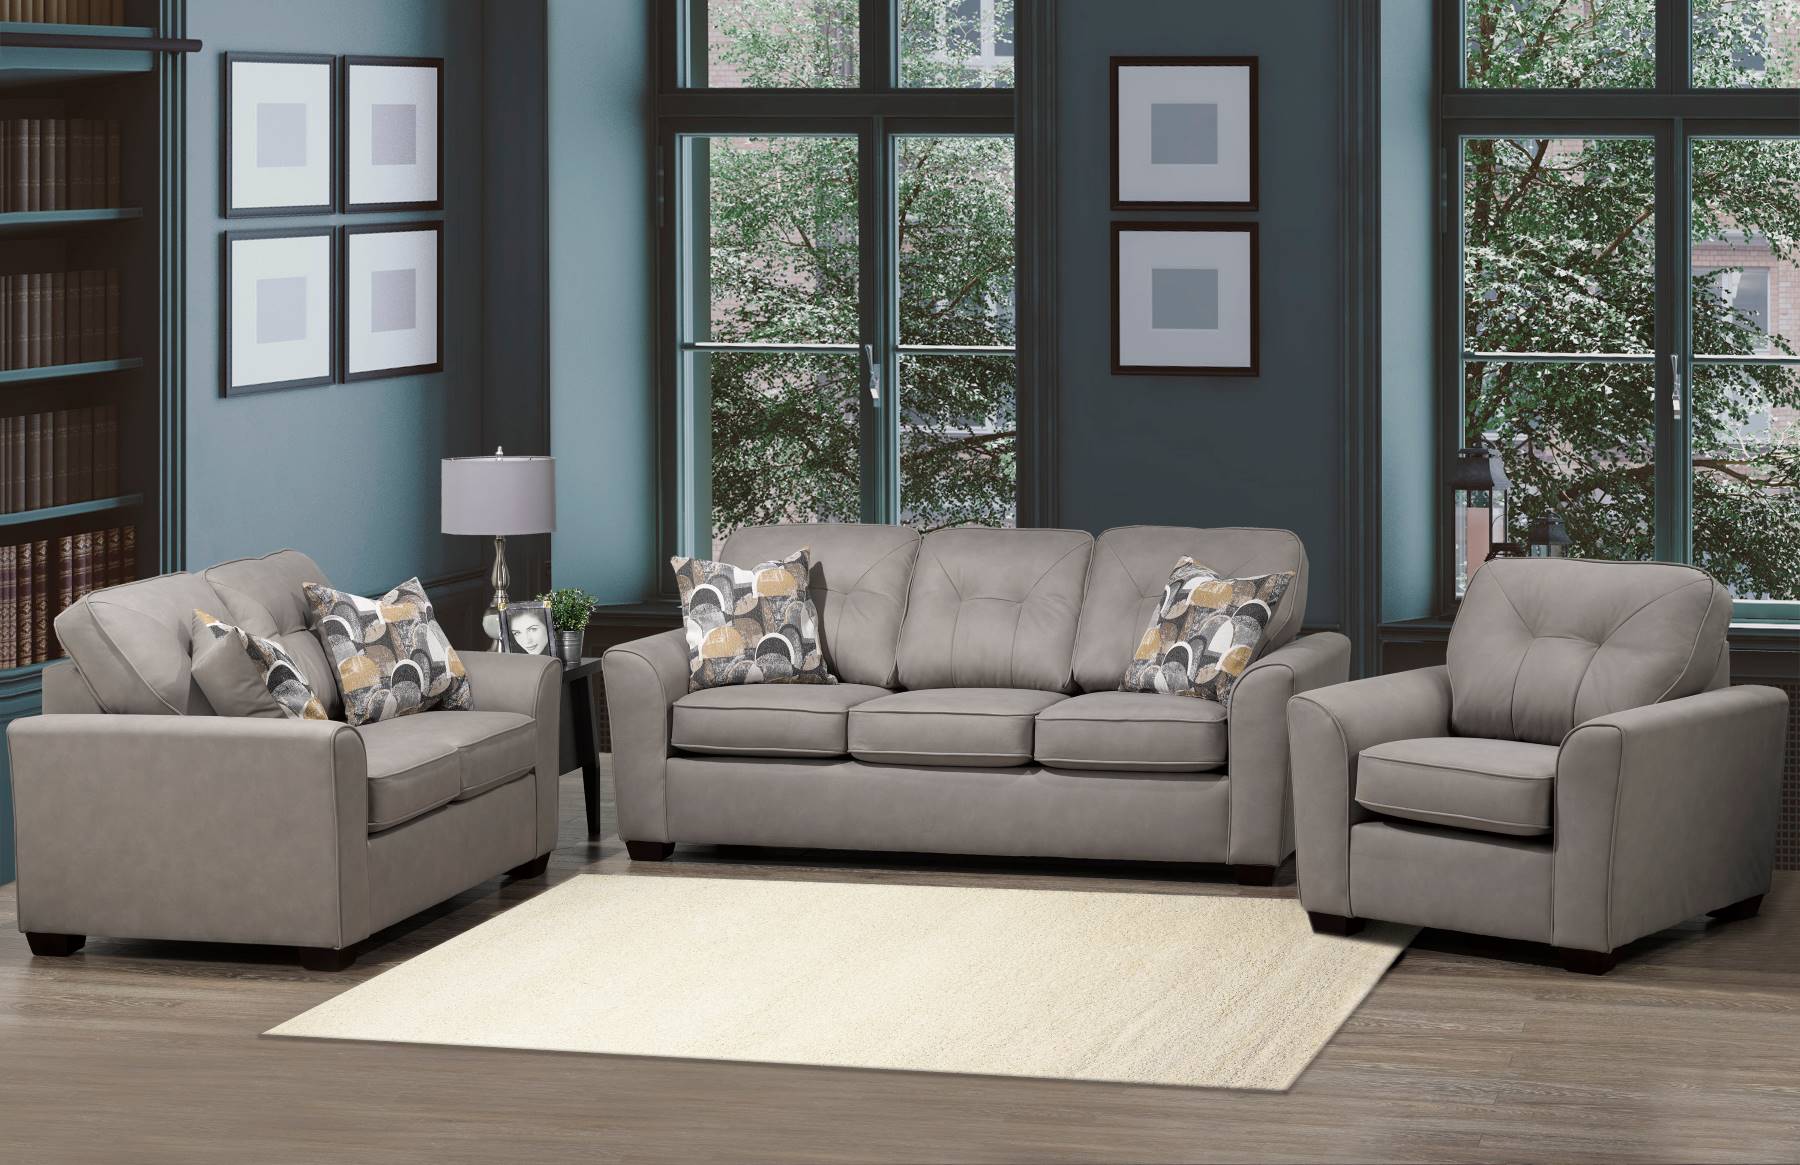 Canadian Made Svalbard Slate Sofa Collection 4424